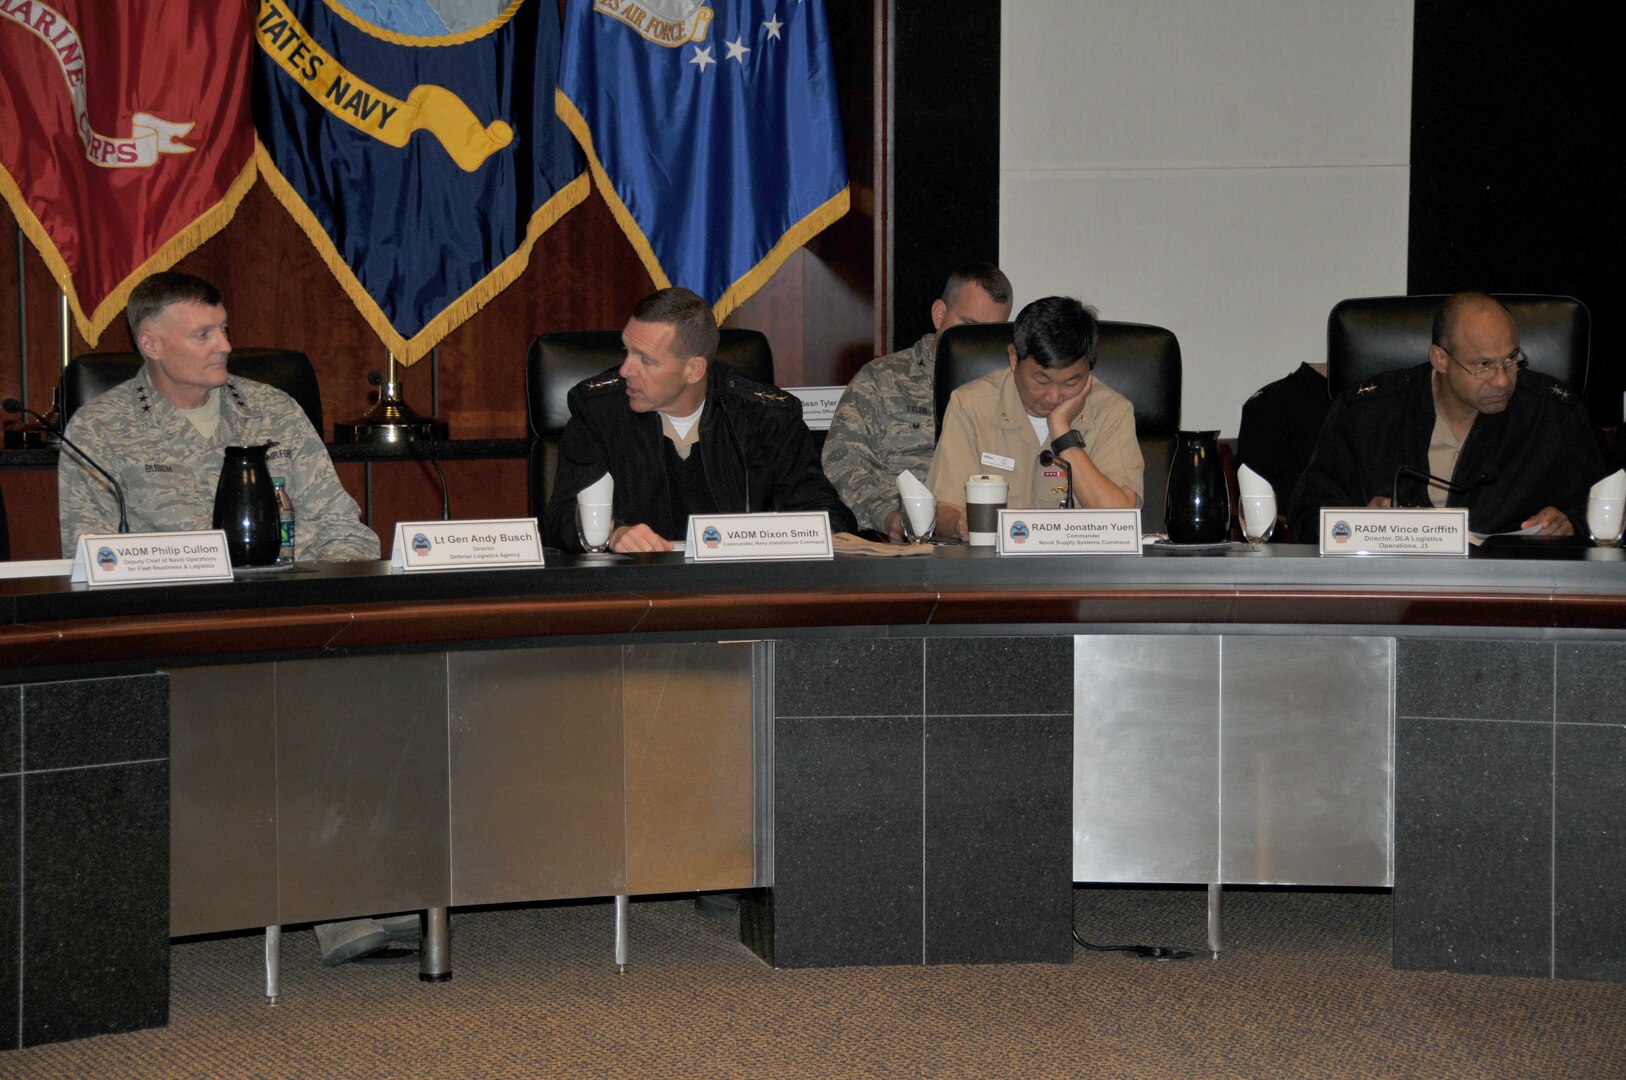 (From left:) DLA Director Air Force Lt. Gen. Andy Busch discusses agenda items with Vice Adm. Dixon Smith, Rear Adm. Jonathan Yuen and DLA Logistics Operations Director Rear Adm. Vince Griffith at the 2016 Navy/DLA Day.